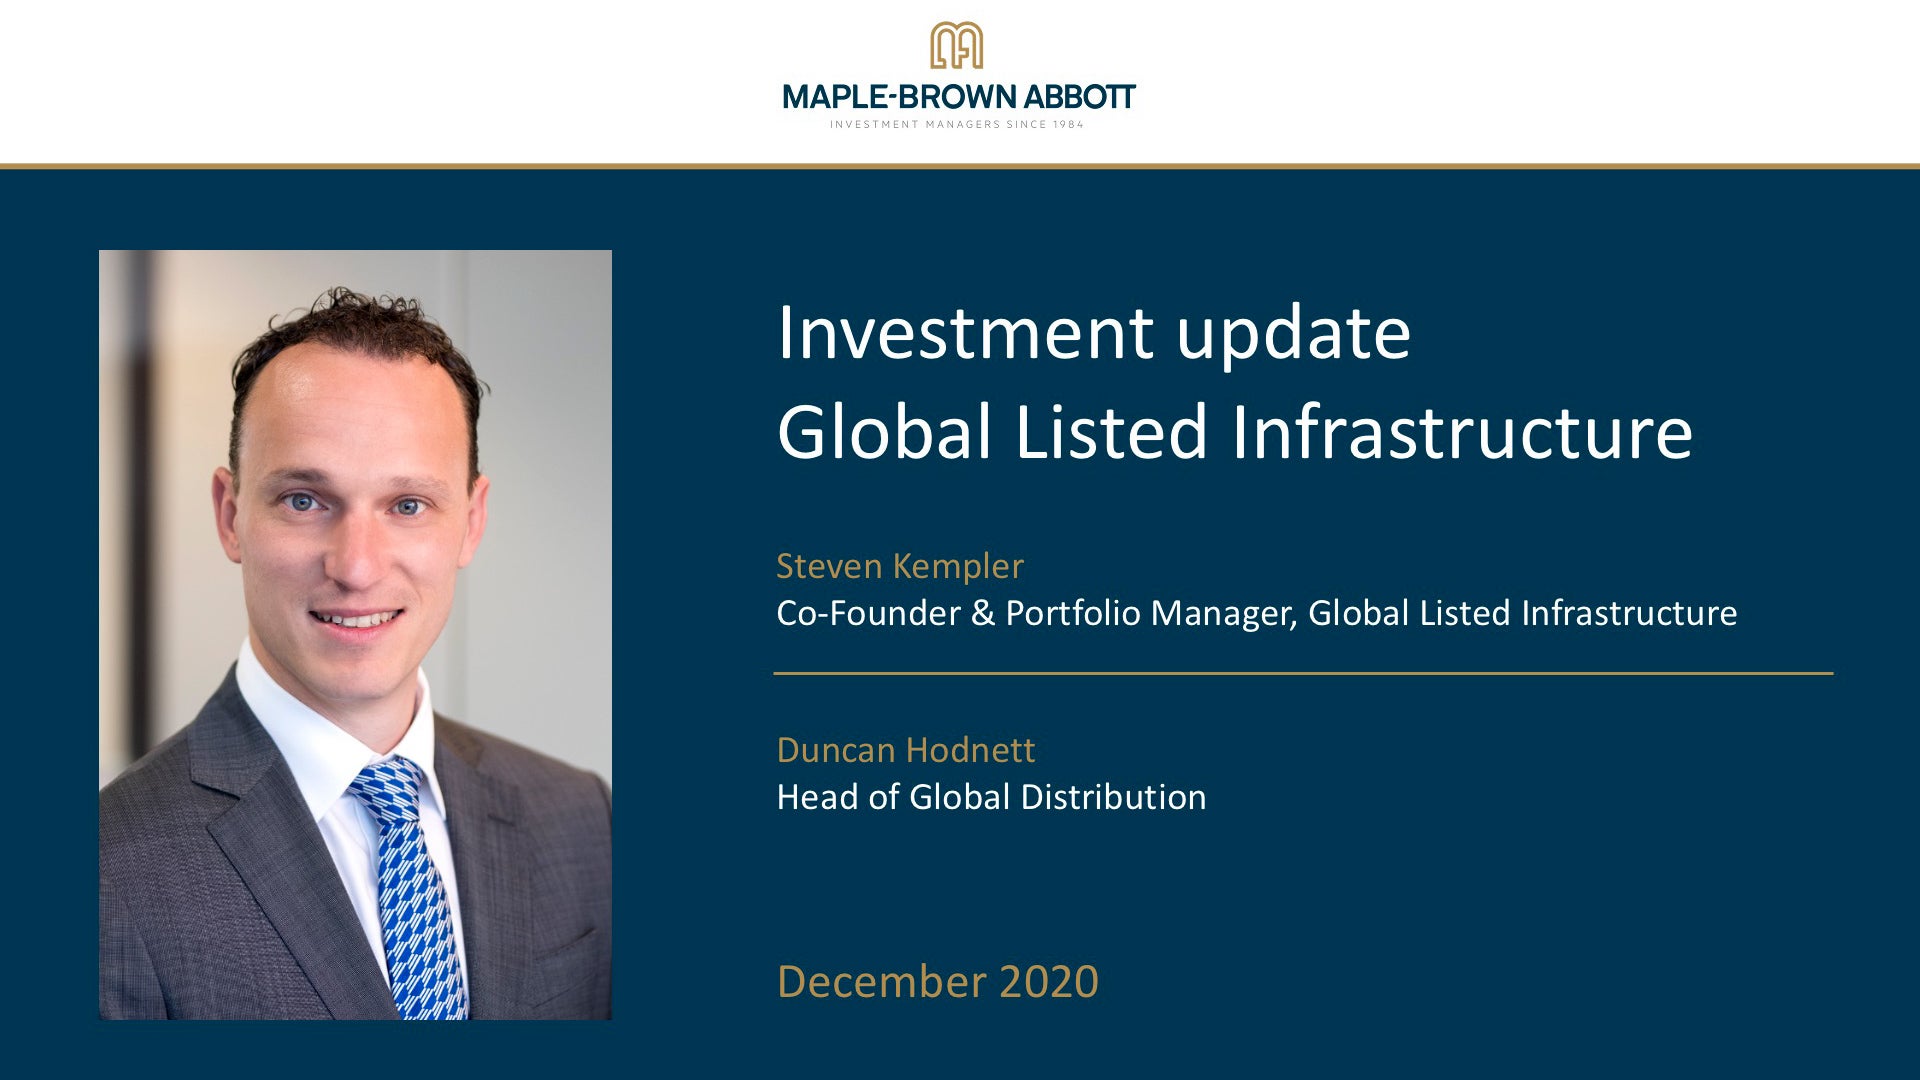 Investment update, Maple-Brown Abbott Global Listed Infrastructure